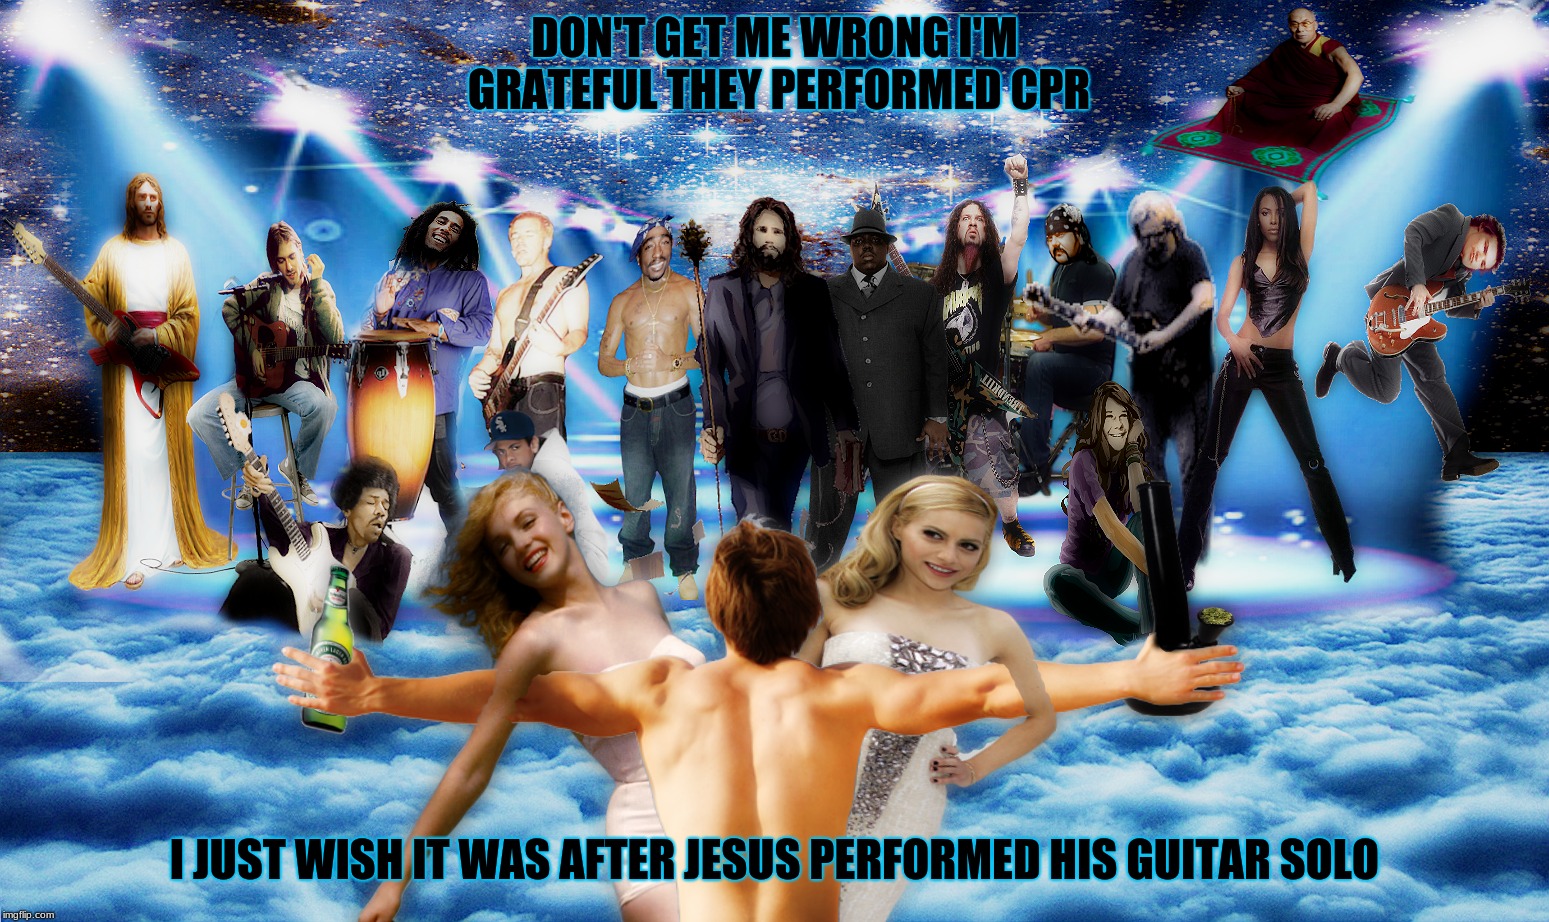 photoshop your afterlife they said..  | DON'T GET ME WRONG I'M GRATEFUL THEY PERFORMED CPR; I JUST WISH IT WAS AFTER JESUS PERFORMED HIS GUITAR SOLO | image tagged in bad photoshop sunday,afterlife,heaven,concert | made w/ Imgflip meme maker